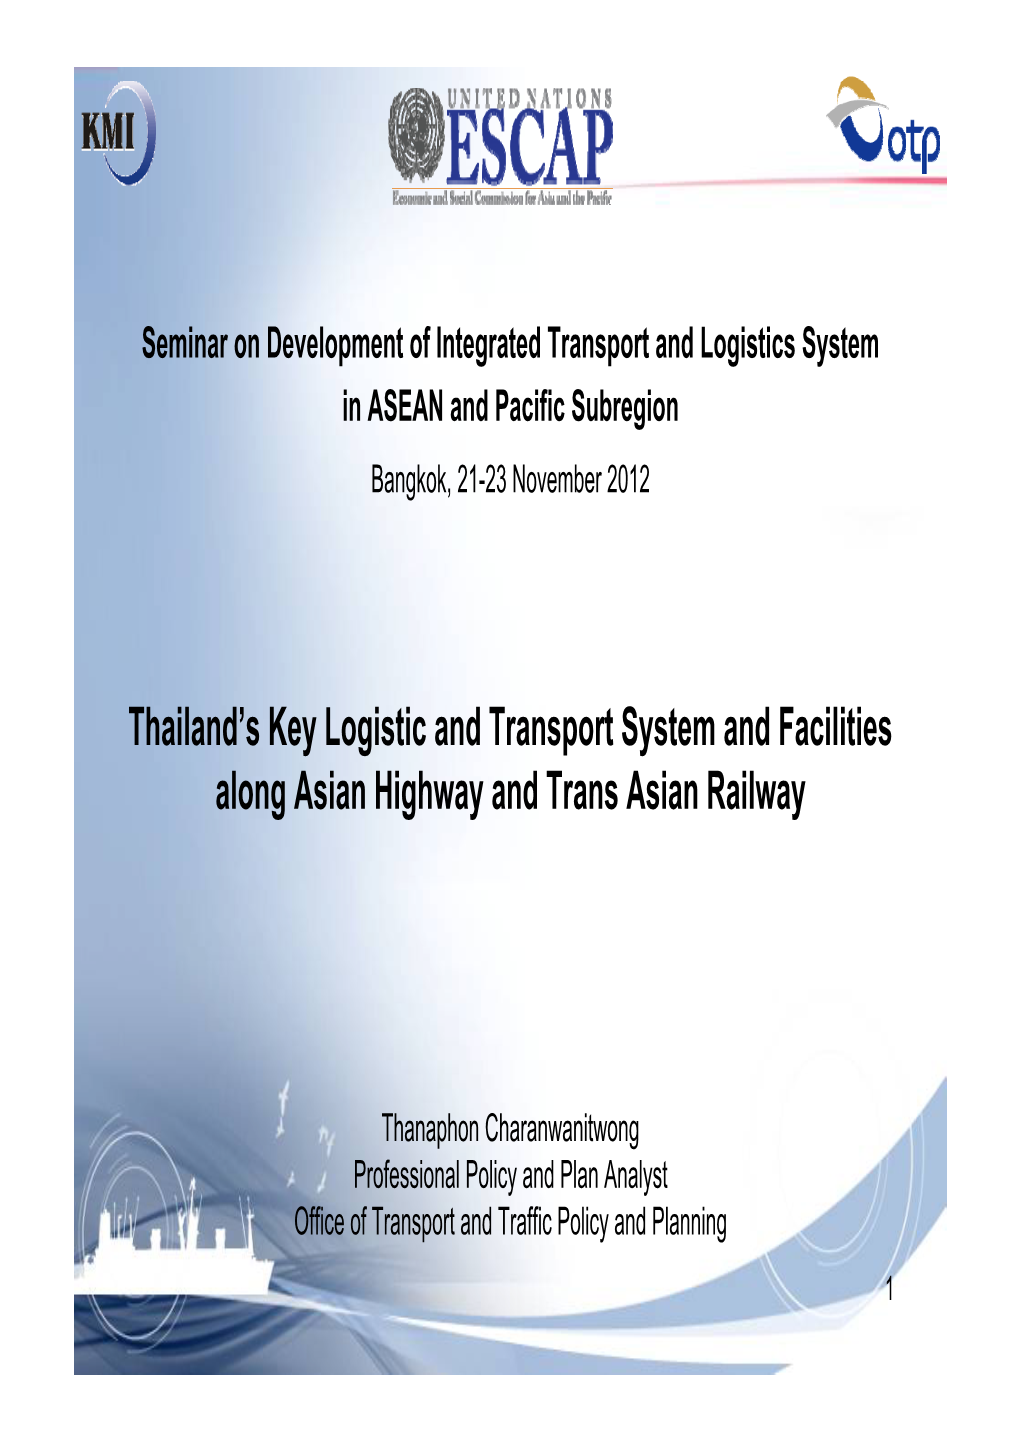 Thailand's Key Logistic and Transport System and Facilities Along Asian